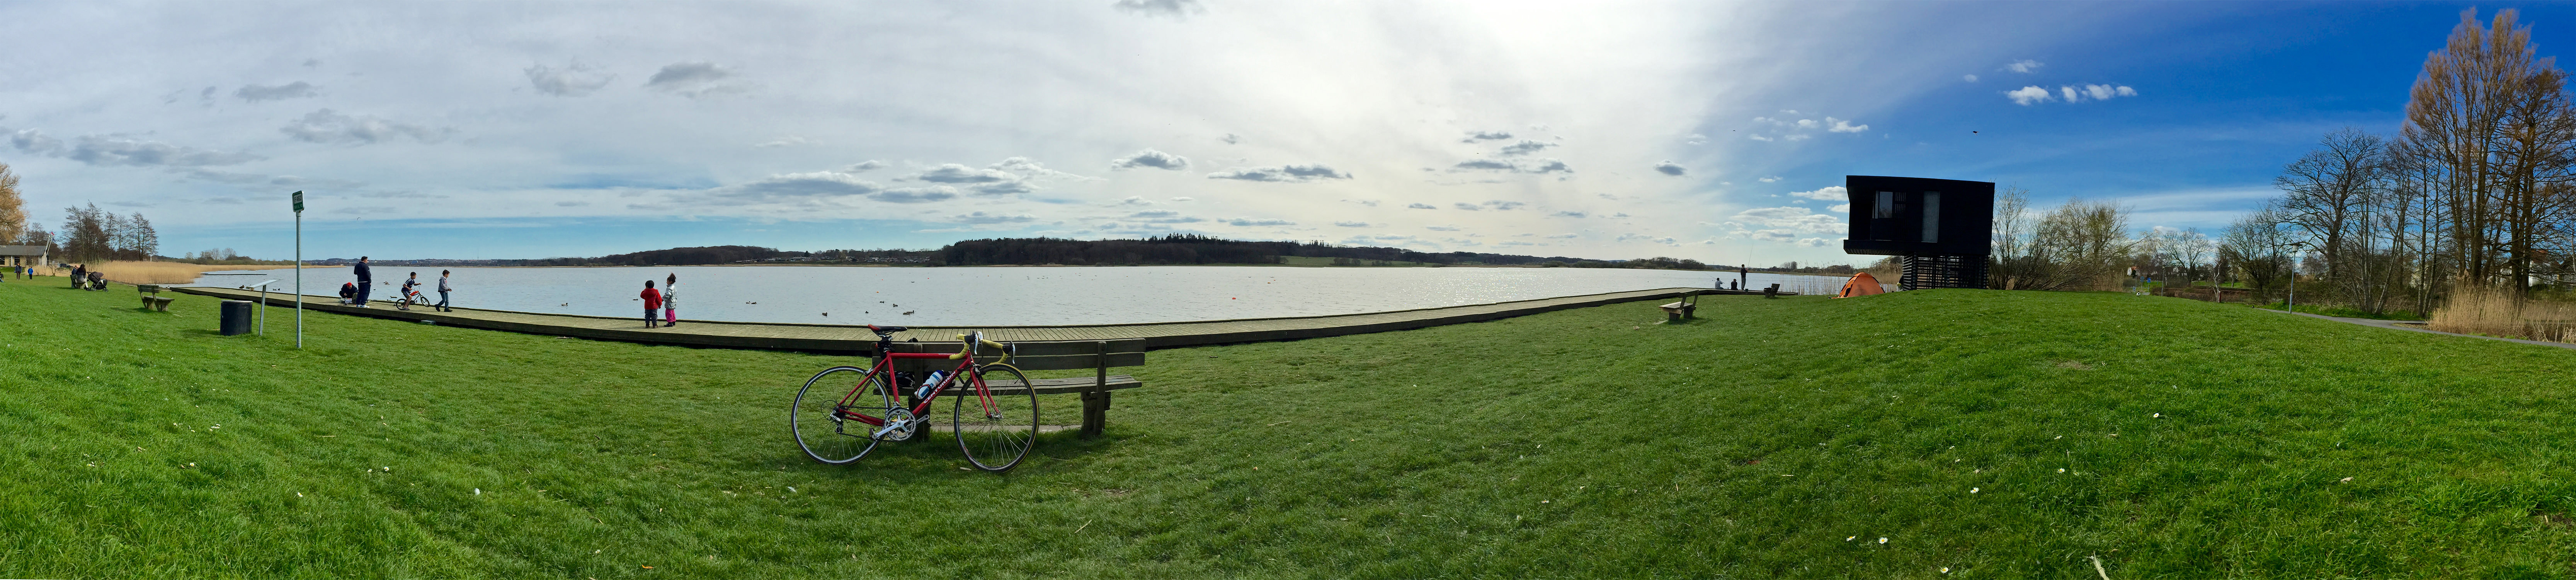 Taking a break from a 38km bicycle ride by the scenic lake in the neighbourhood of Brabrand, Aarhus, Denmark.